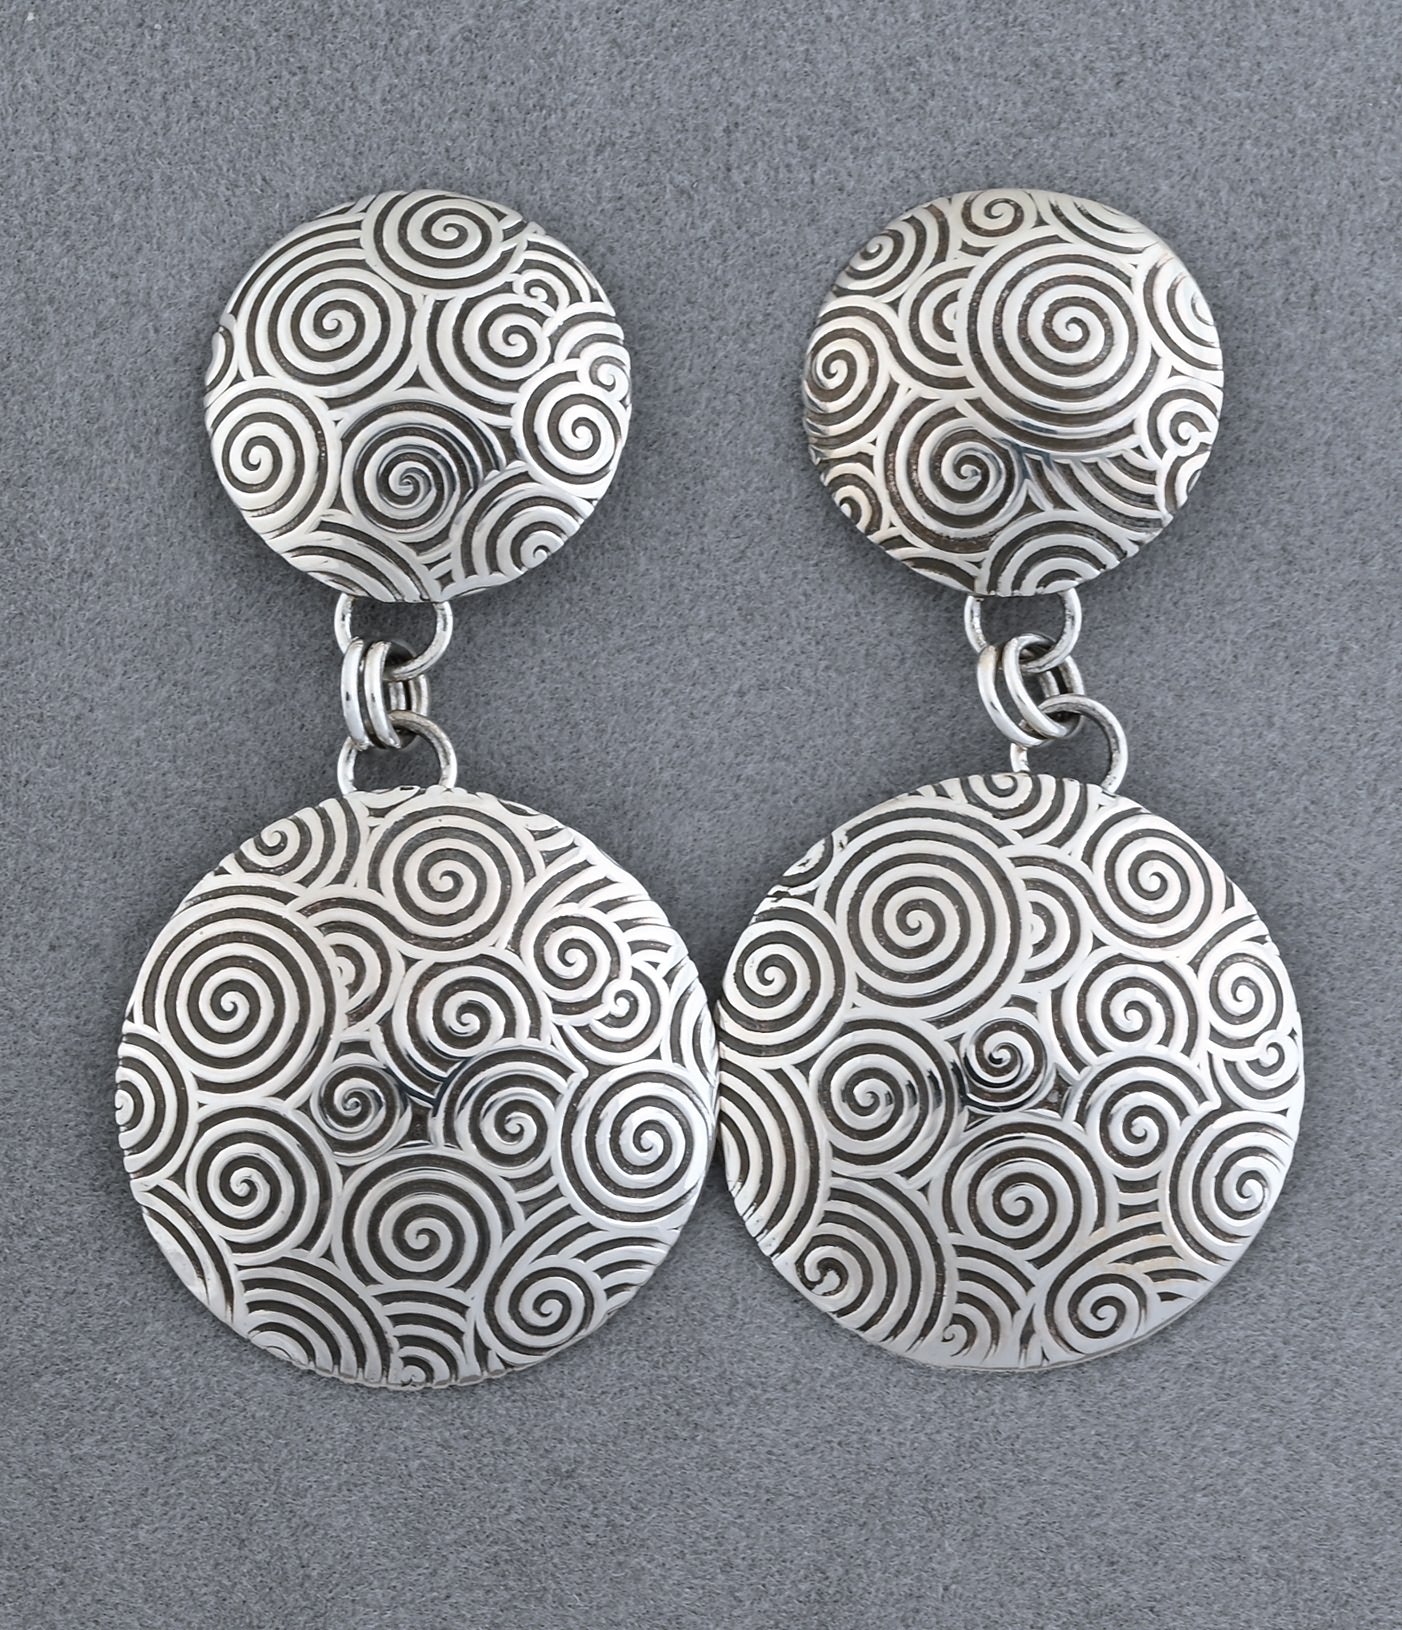 Earrings with Double Swirl Domes by Artie Yellowhorse